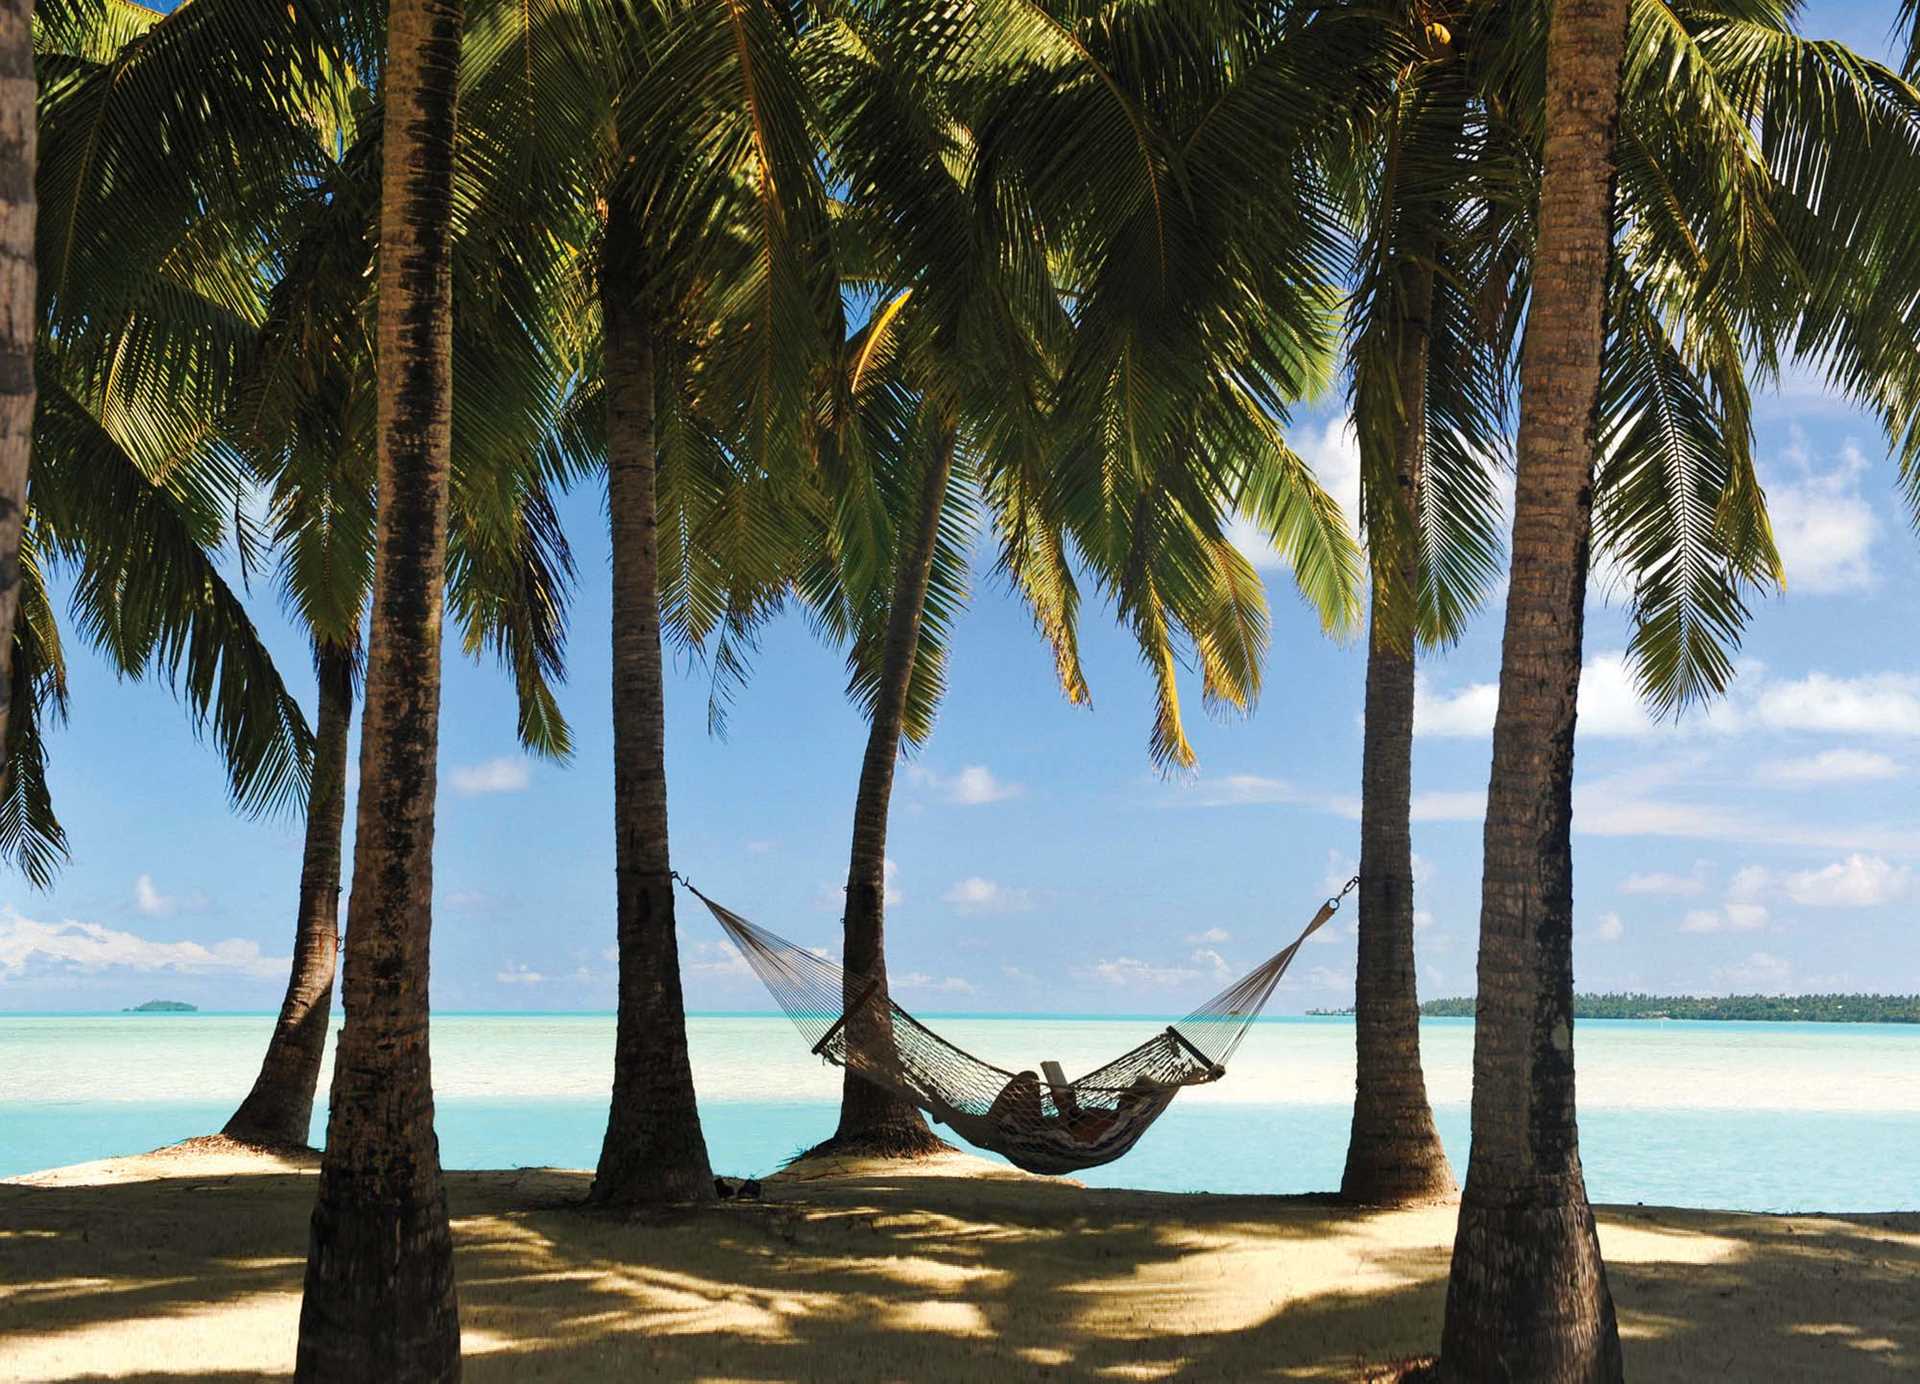 A person relaxing in a hammock by the beach, enjoying the cool shade of the coconut palms